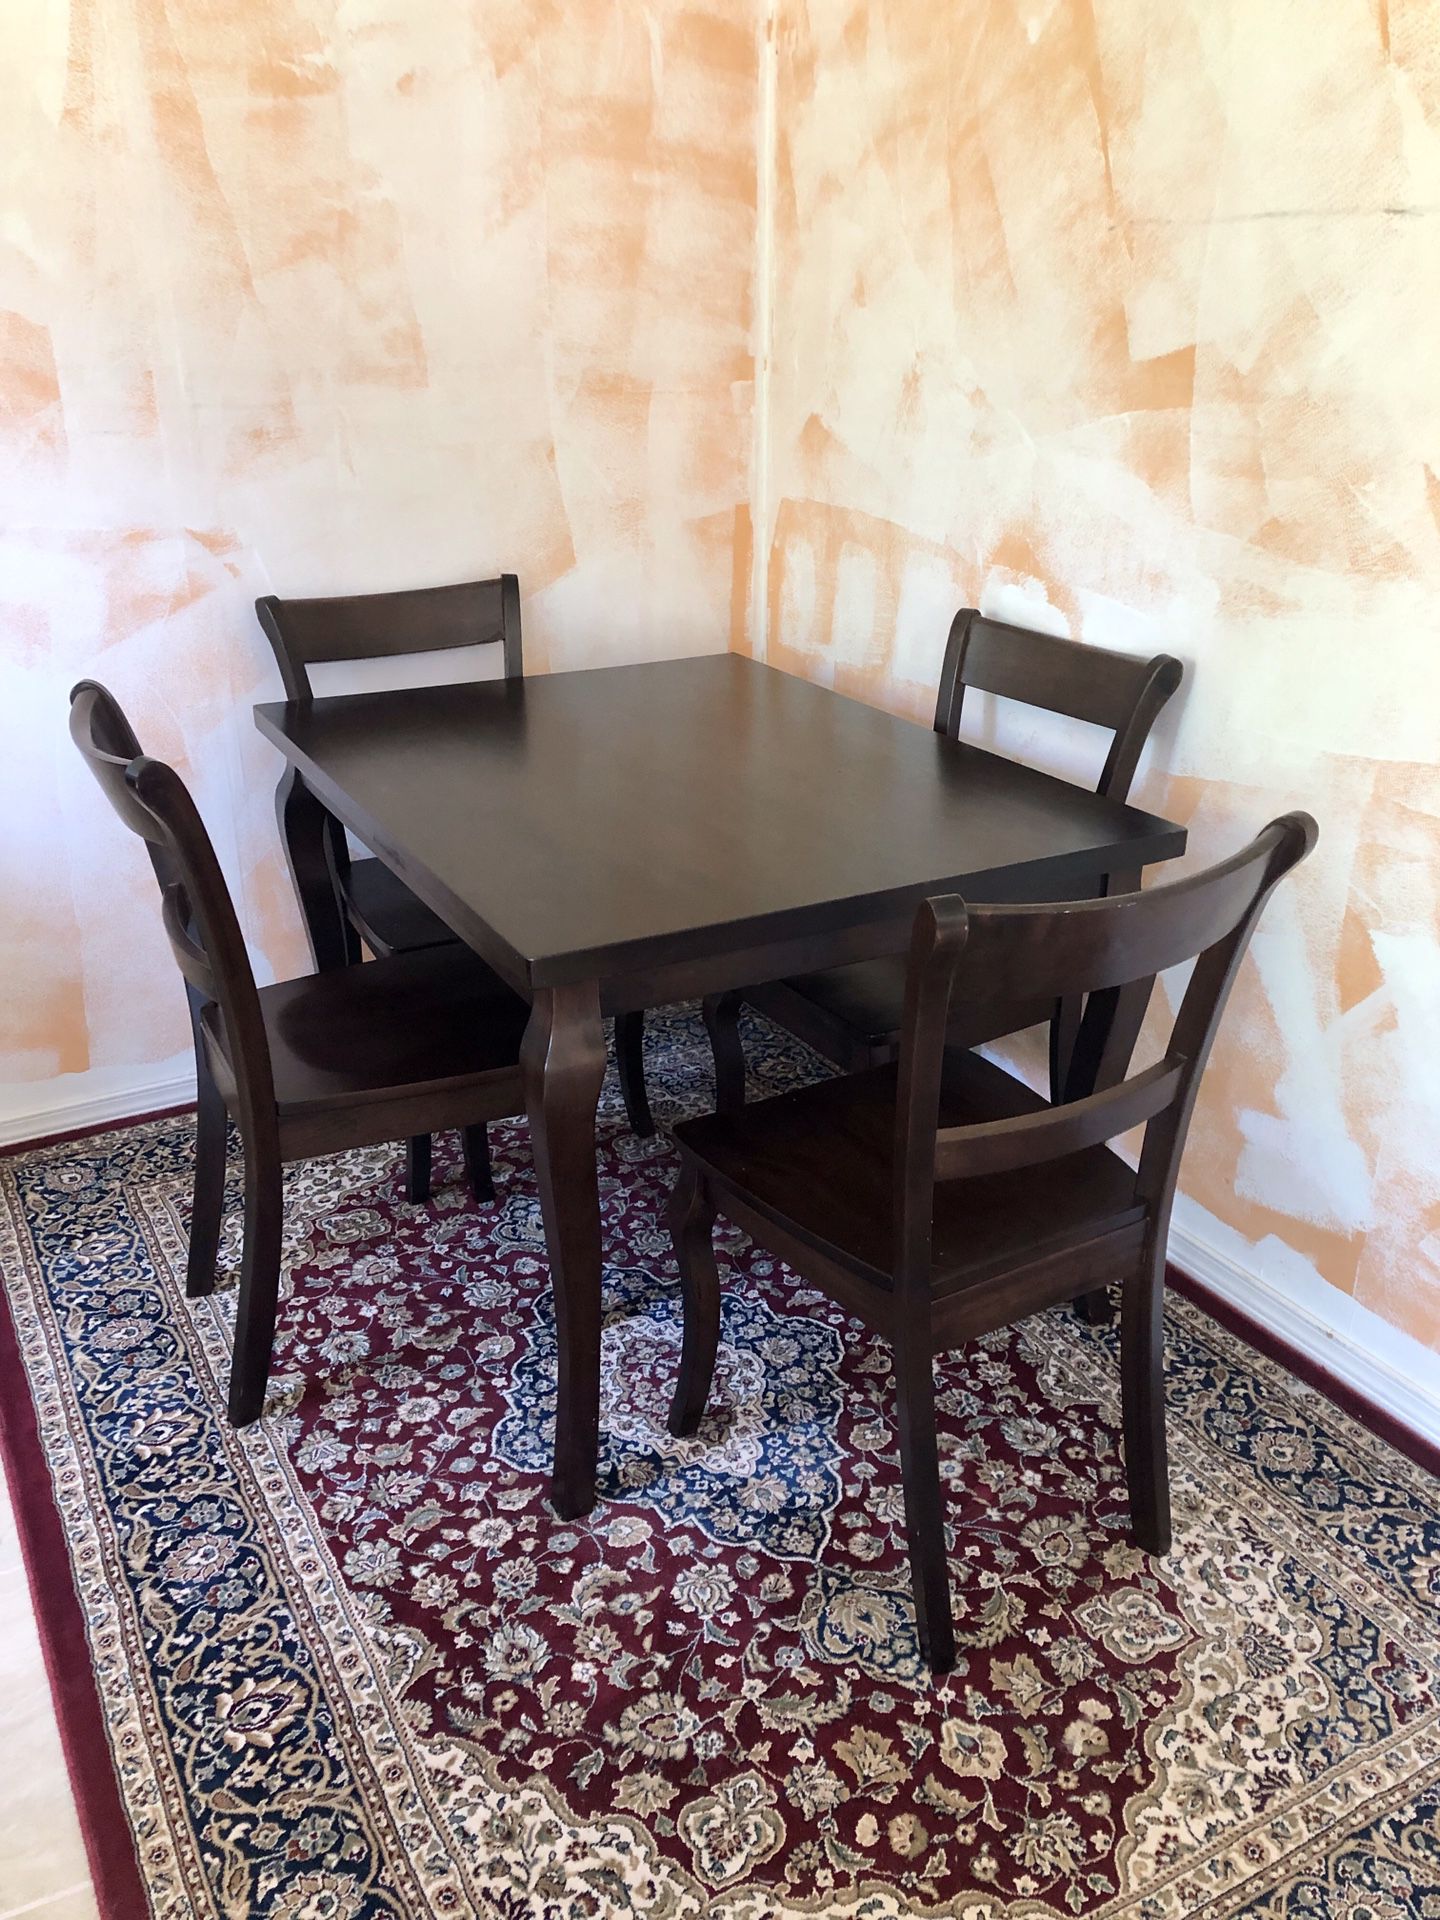 Solid wood breakfast nook table and chairs